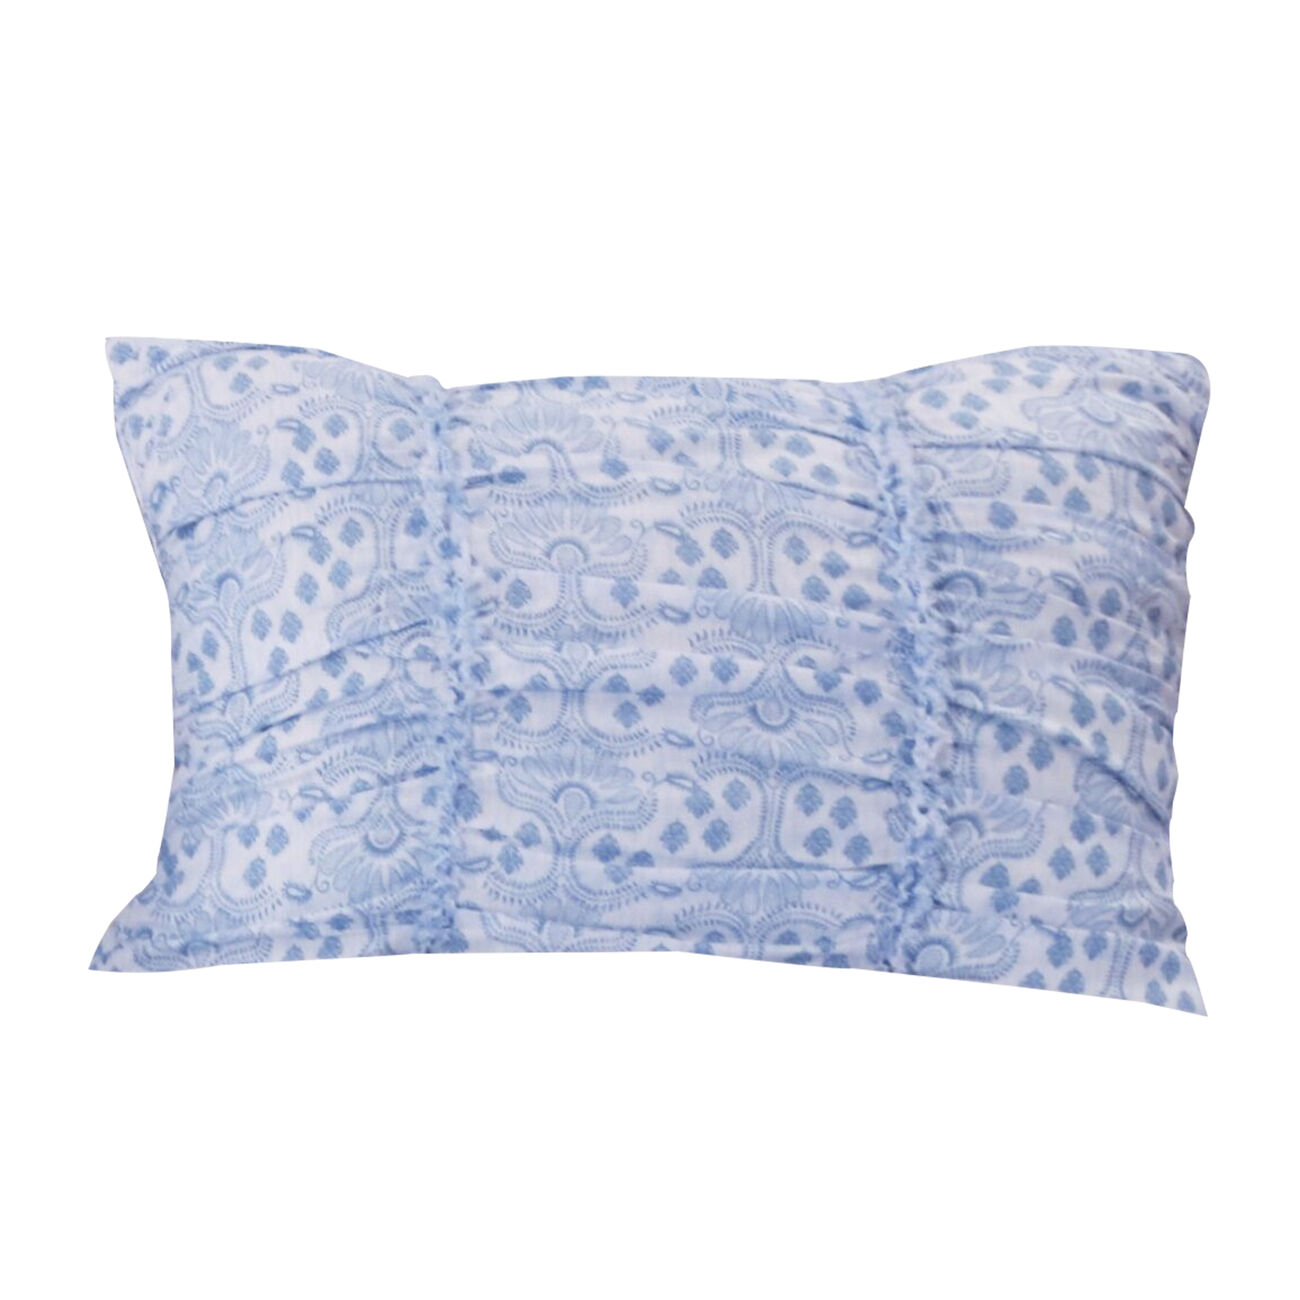 Fabric Pillow Sham with Ruffled and Pleated Details, Blue